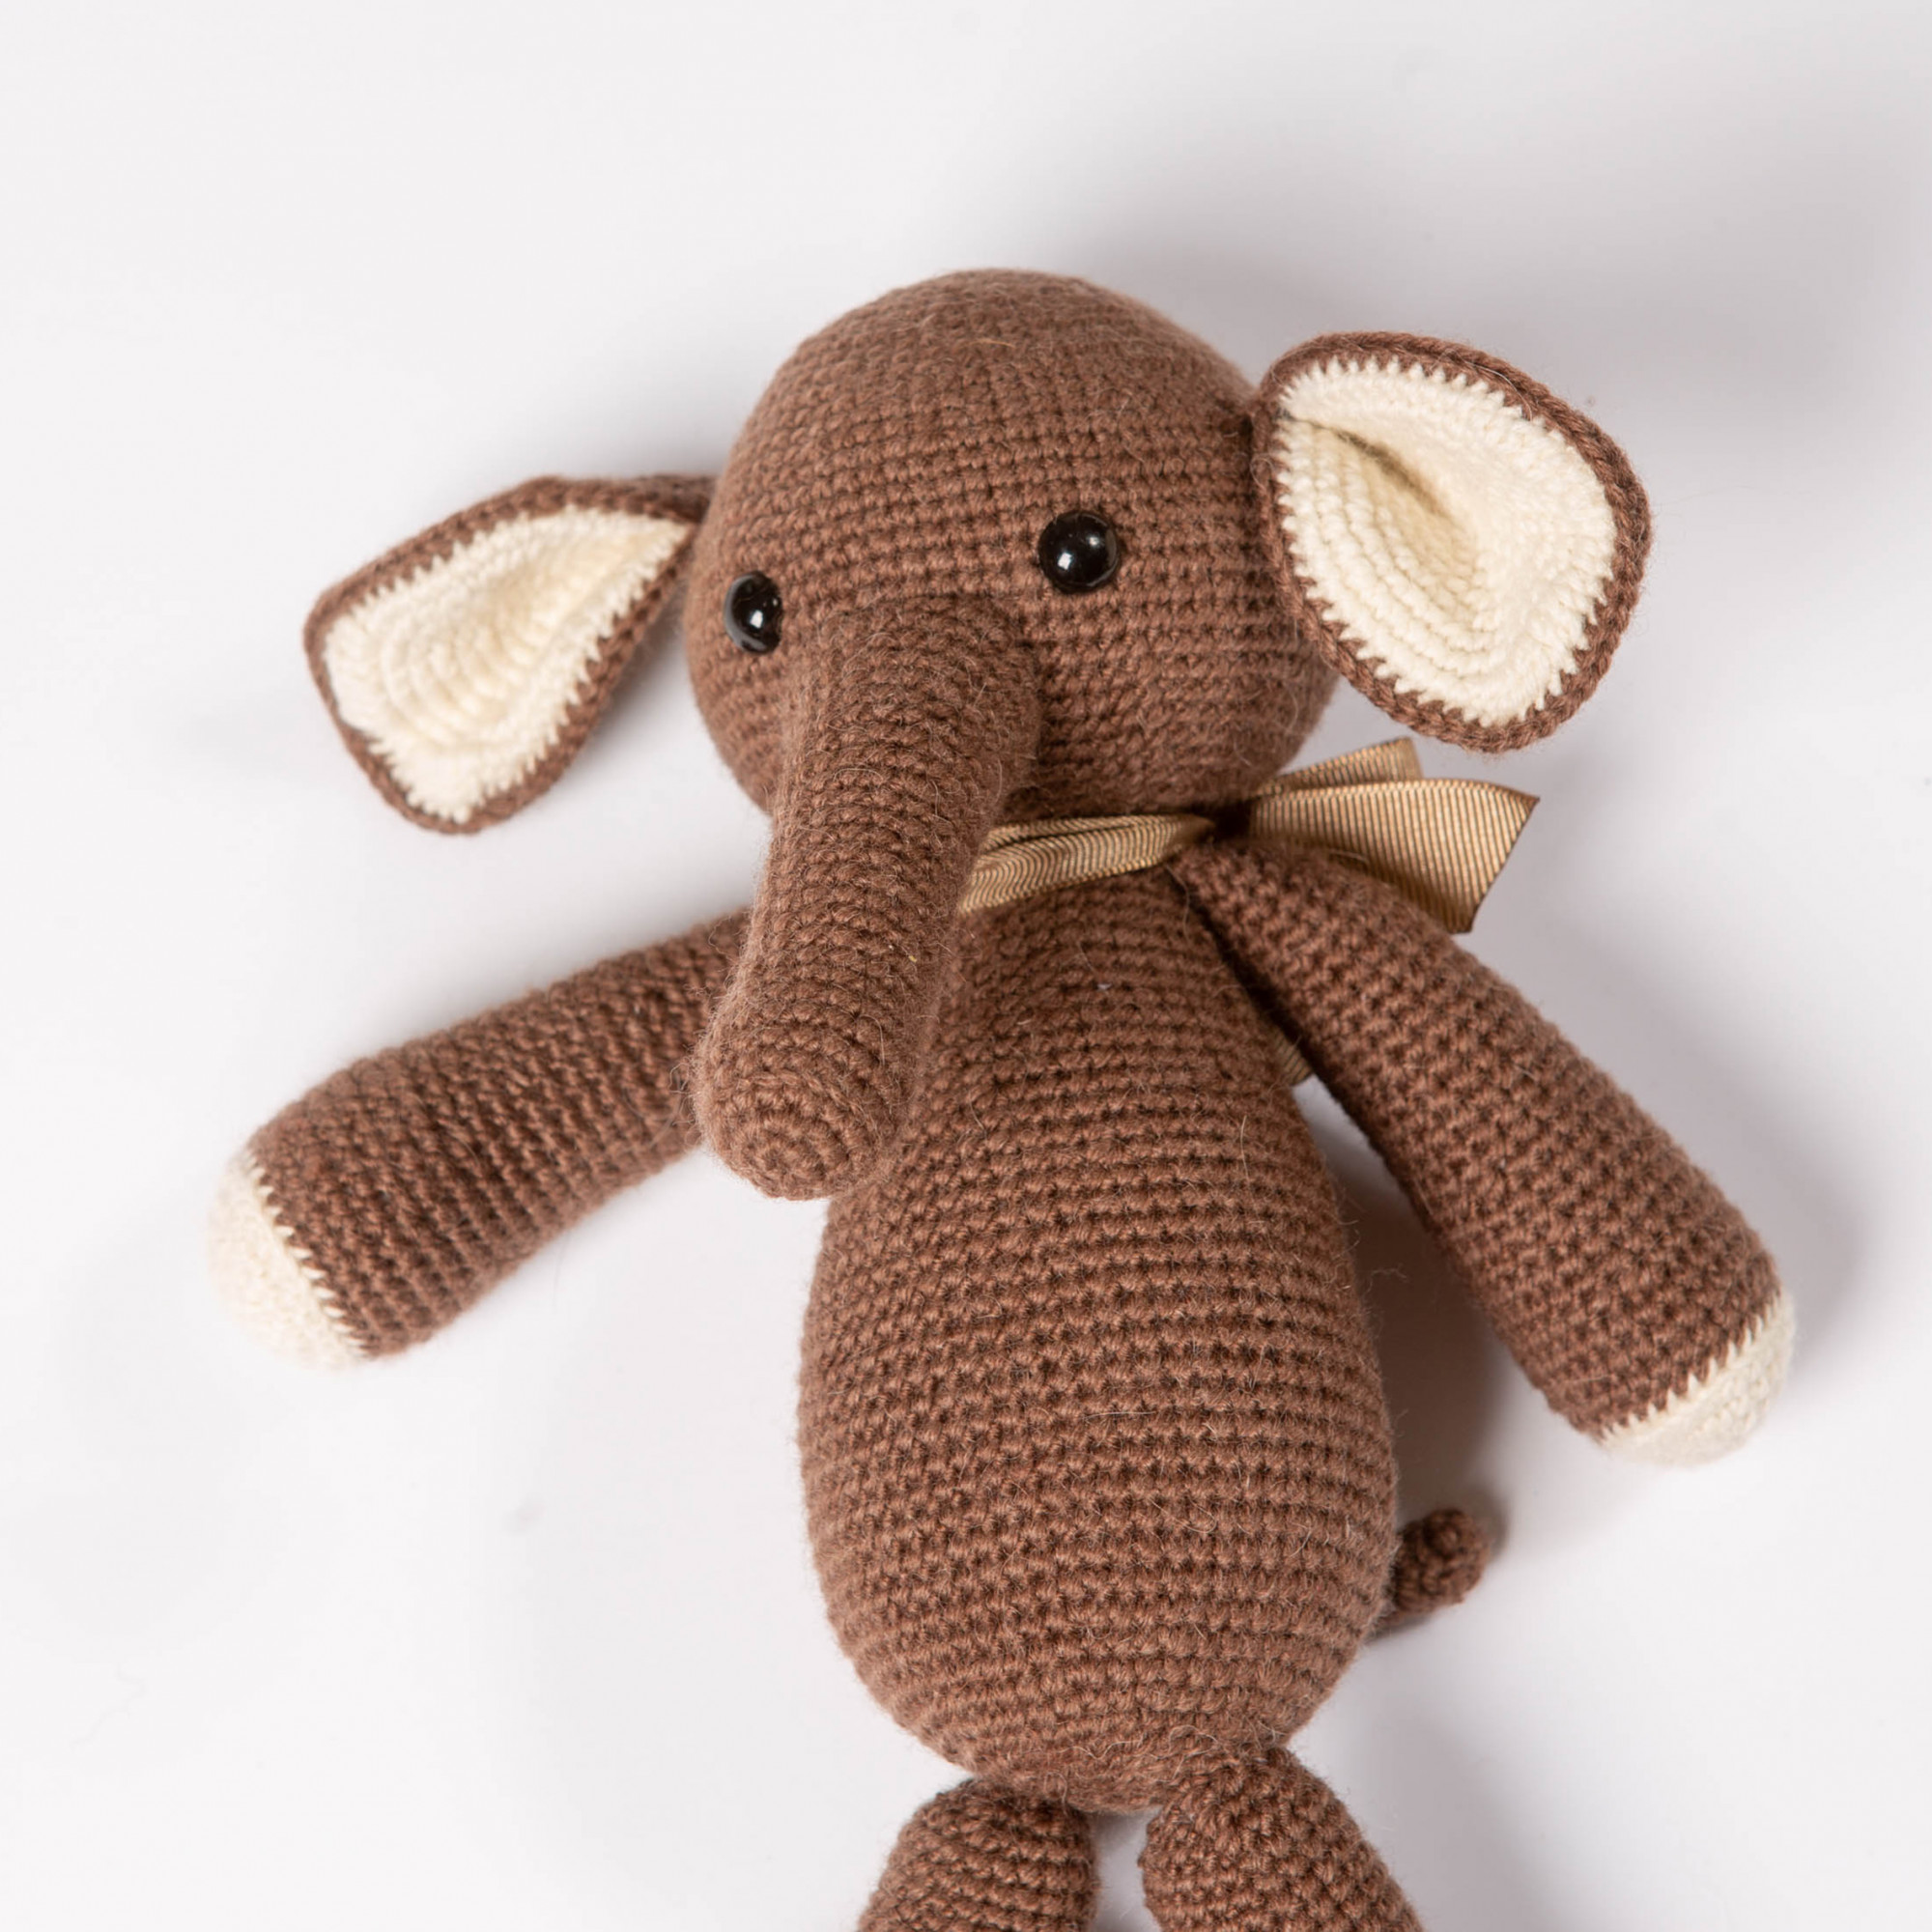 Gift Elephant crocheted Soft toy for baby